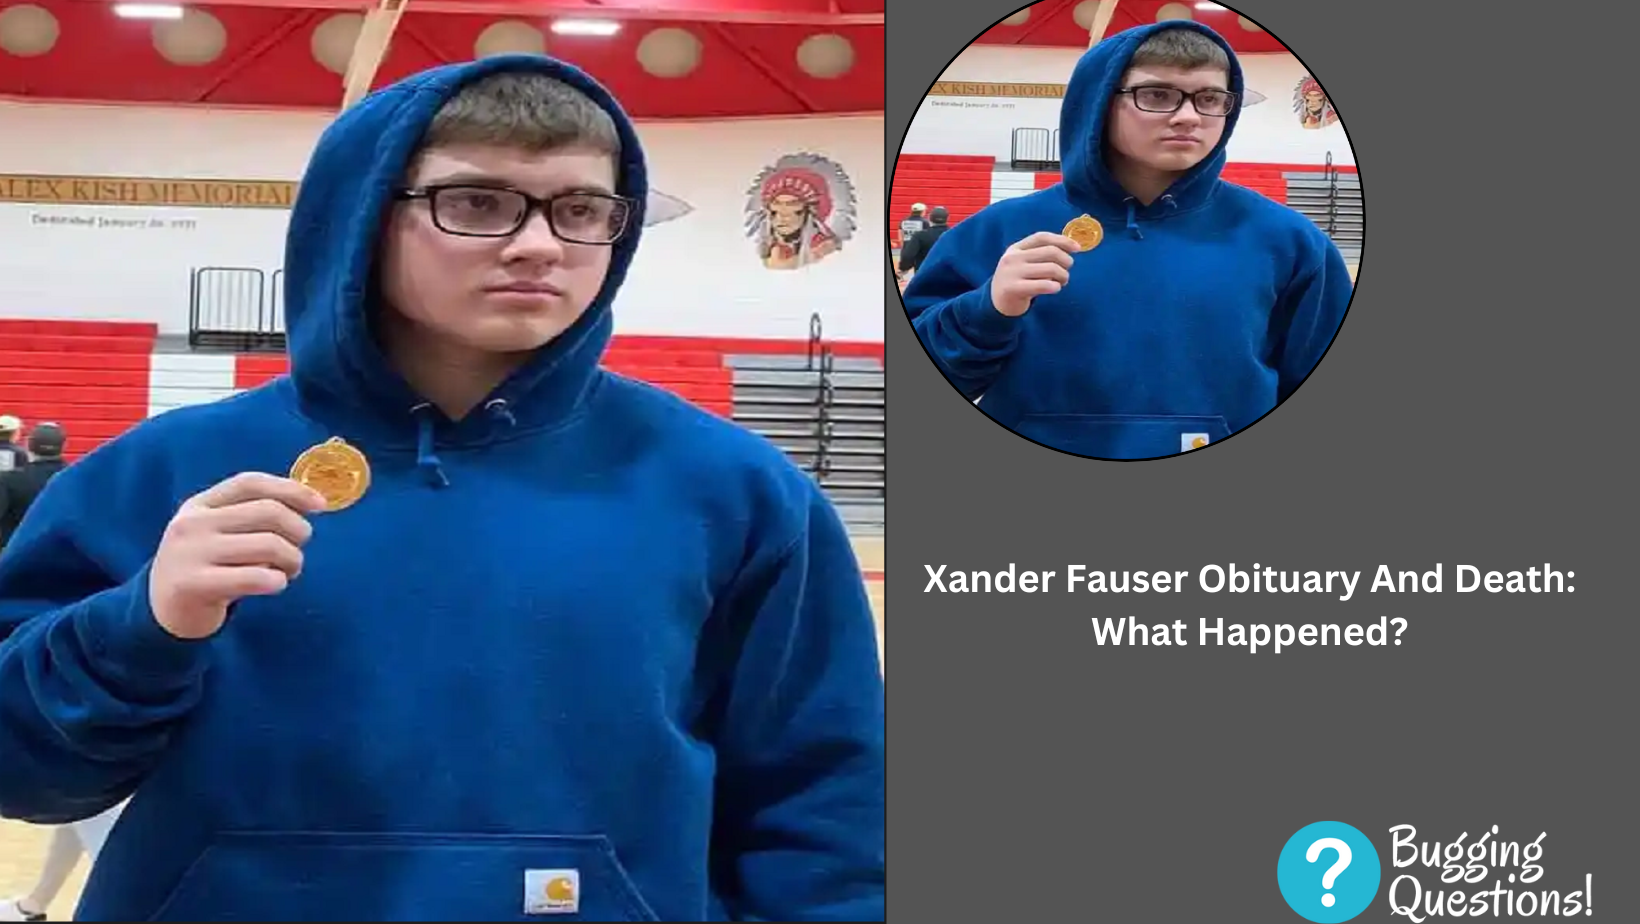 Xander Fauser Obituary And Death: What Happened?